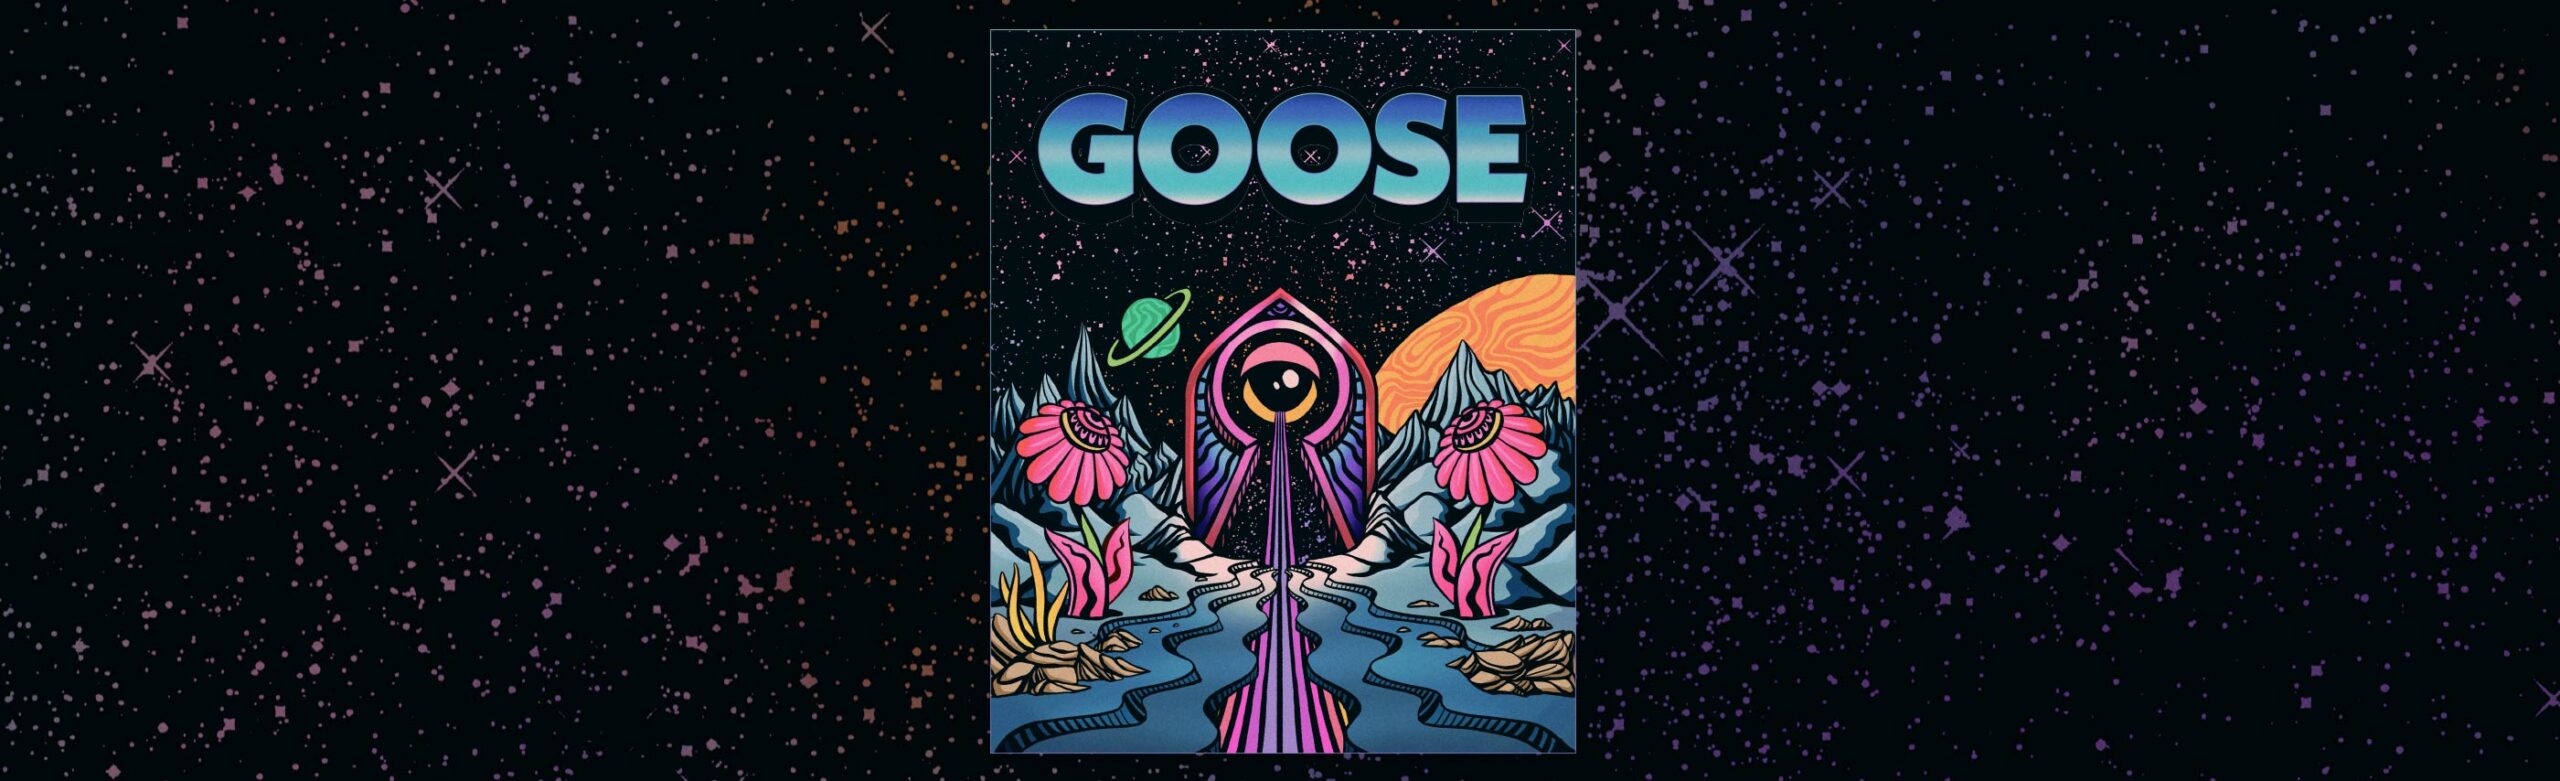 An Evening with Goose Confirmed at KettleHouse Amphitheater Image